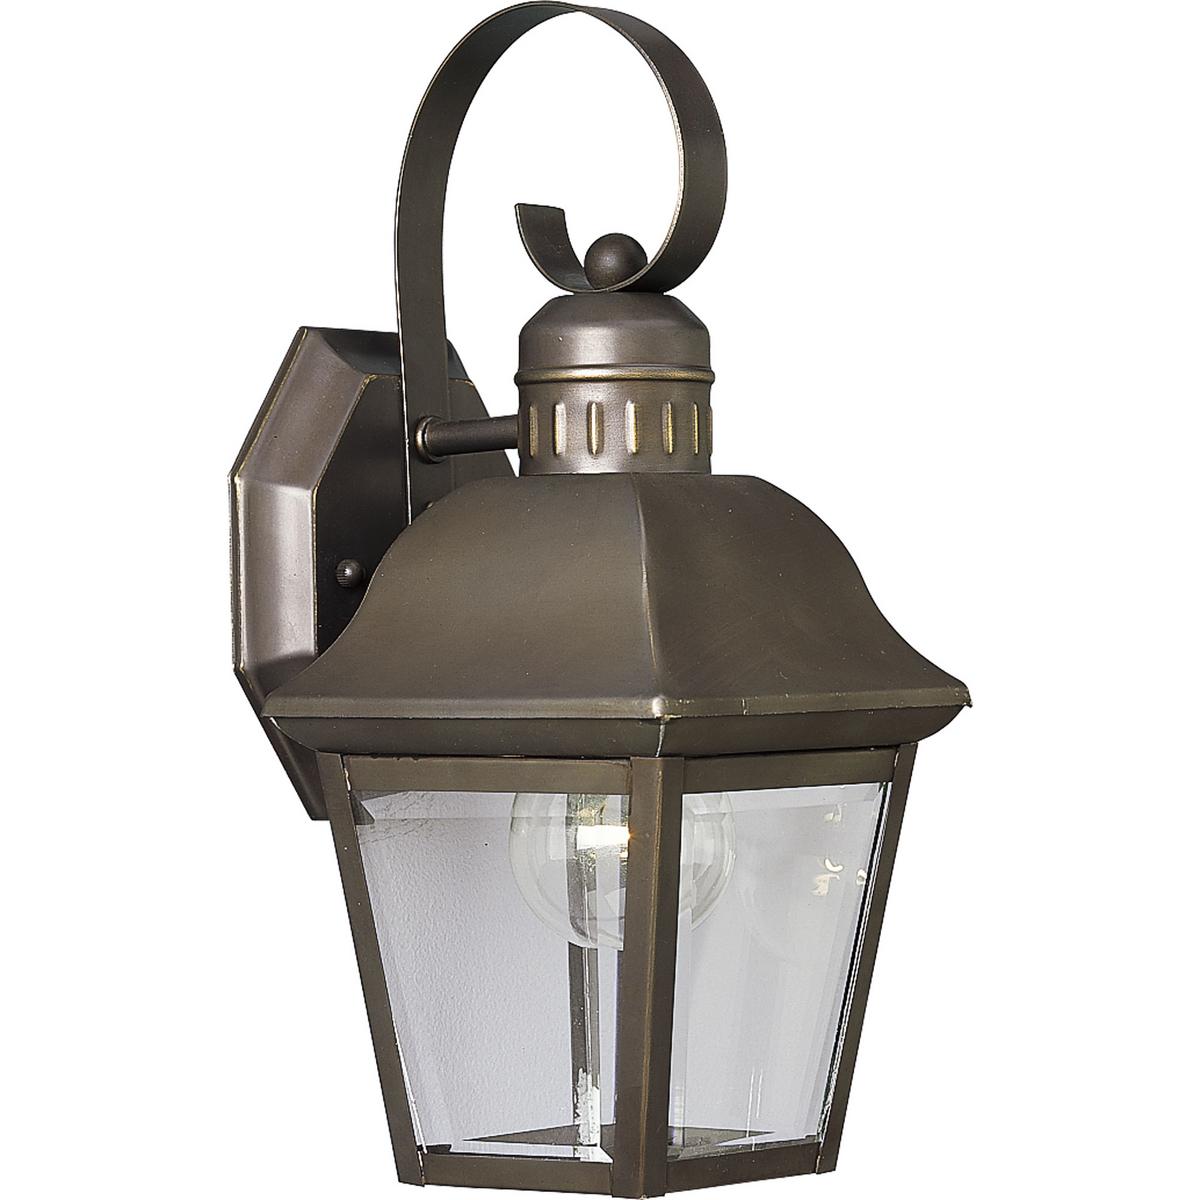 Hubbell P5687-20 The Andover collection one-light small wall lantern with aluminum construction, offers a mixture of traditional and country style for a variety of applications. Beveled glass panels allow optimum brightness.  ; A mixture of traditional and country style. 